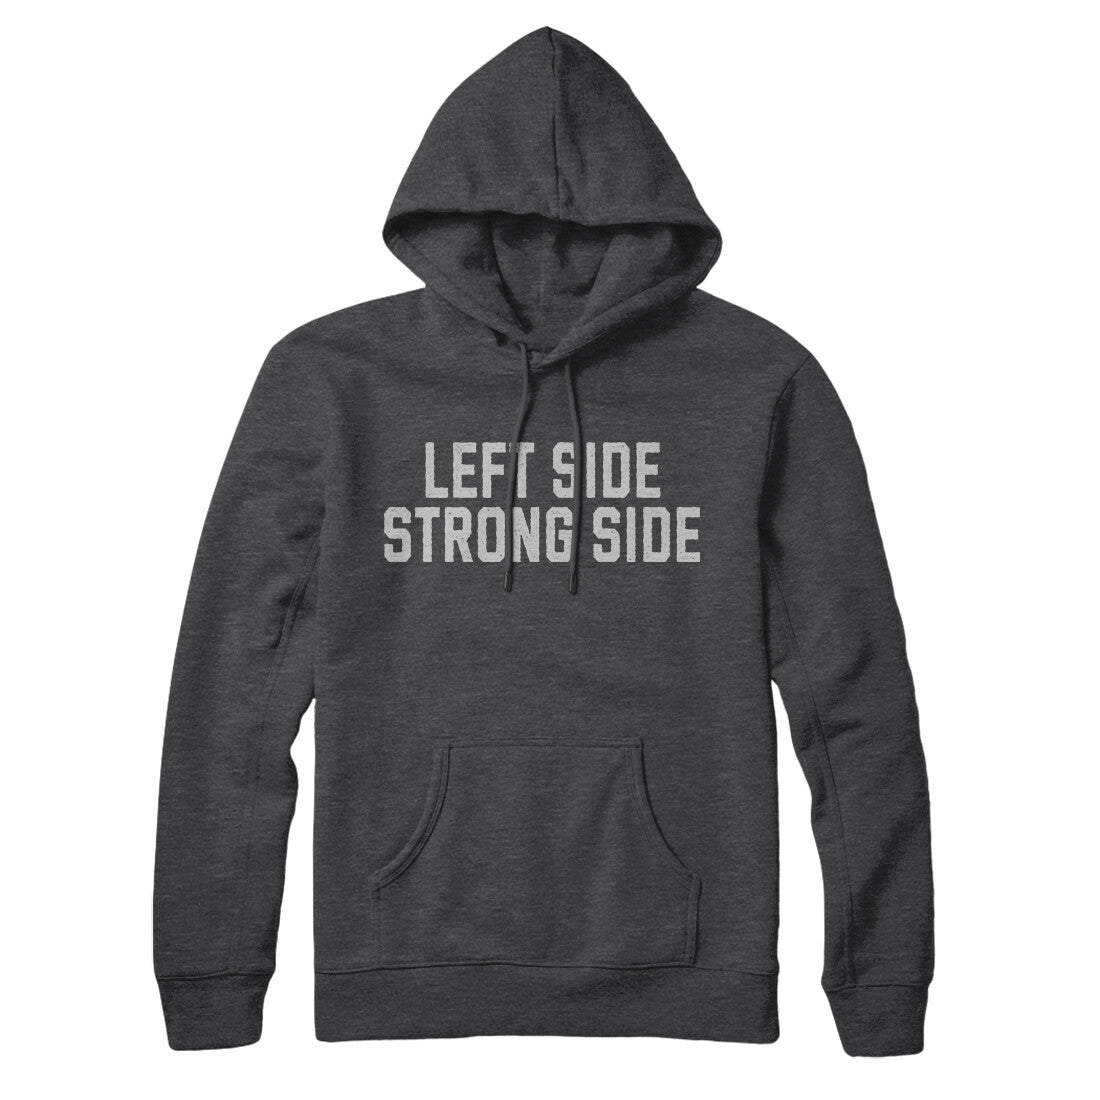 Left Side Strong Side in Charcoal Heather Color